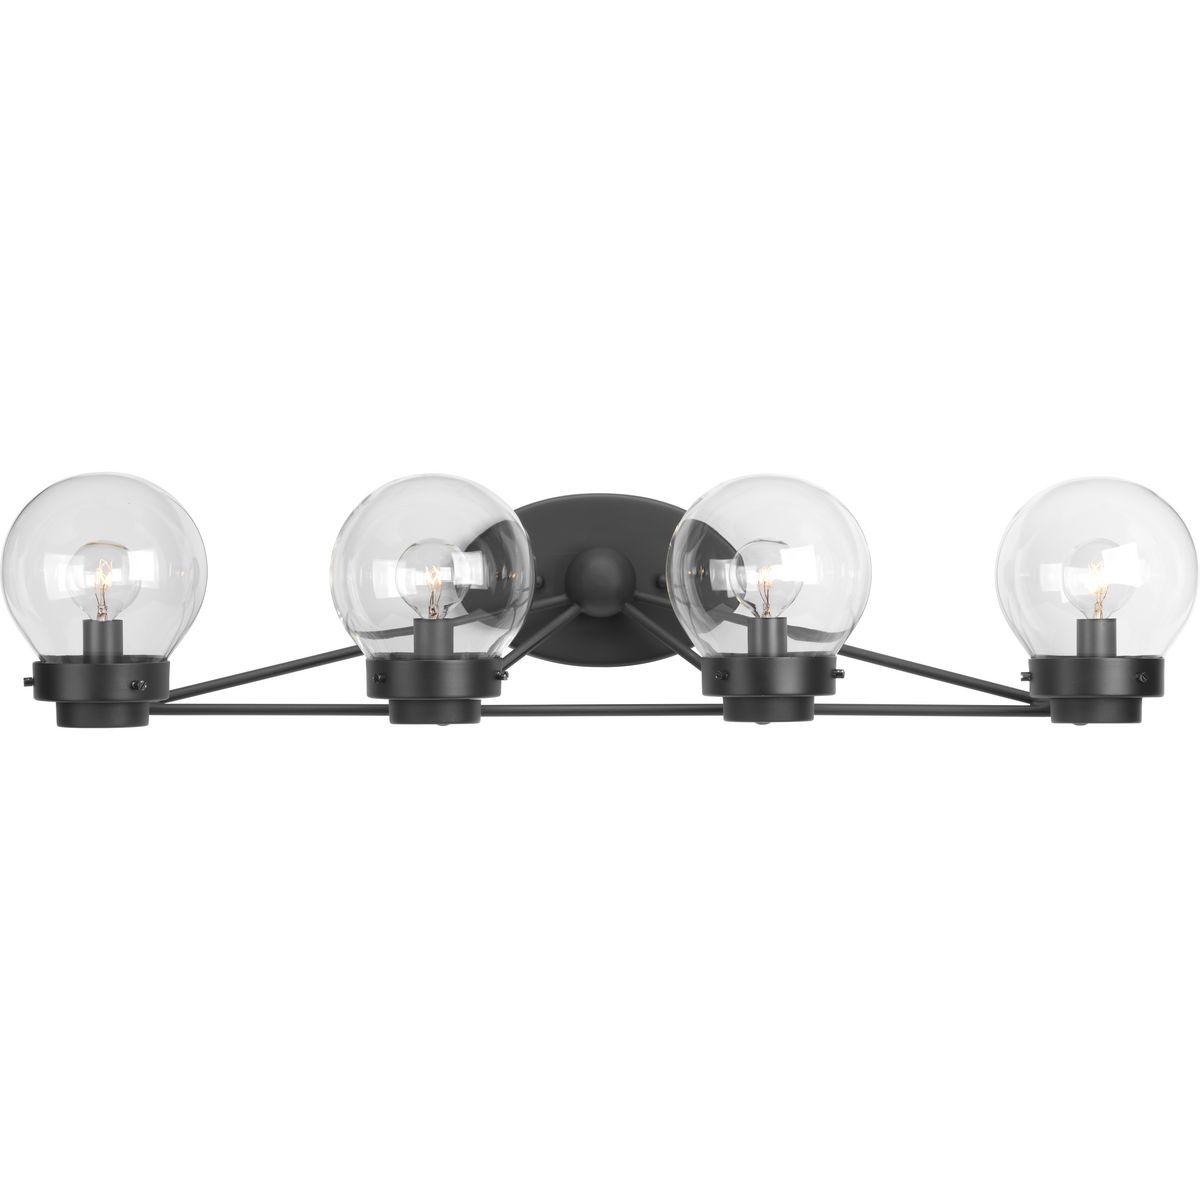 Spatial Collection Four-Light Matte Black Clear Glass Global Bath Vanity Light - Damp Location Listed